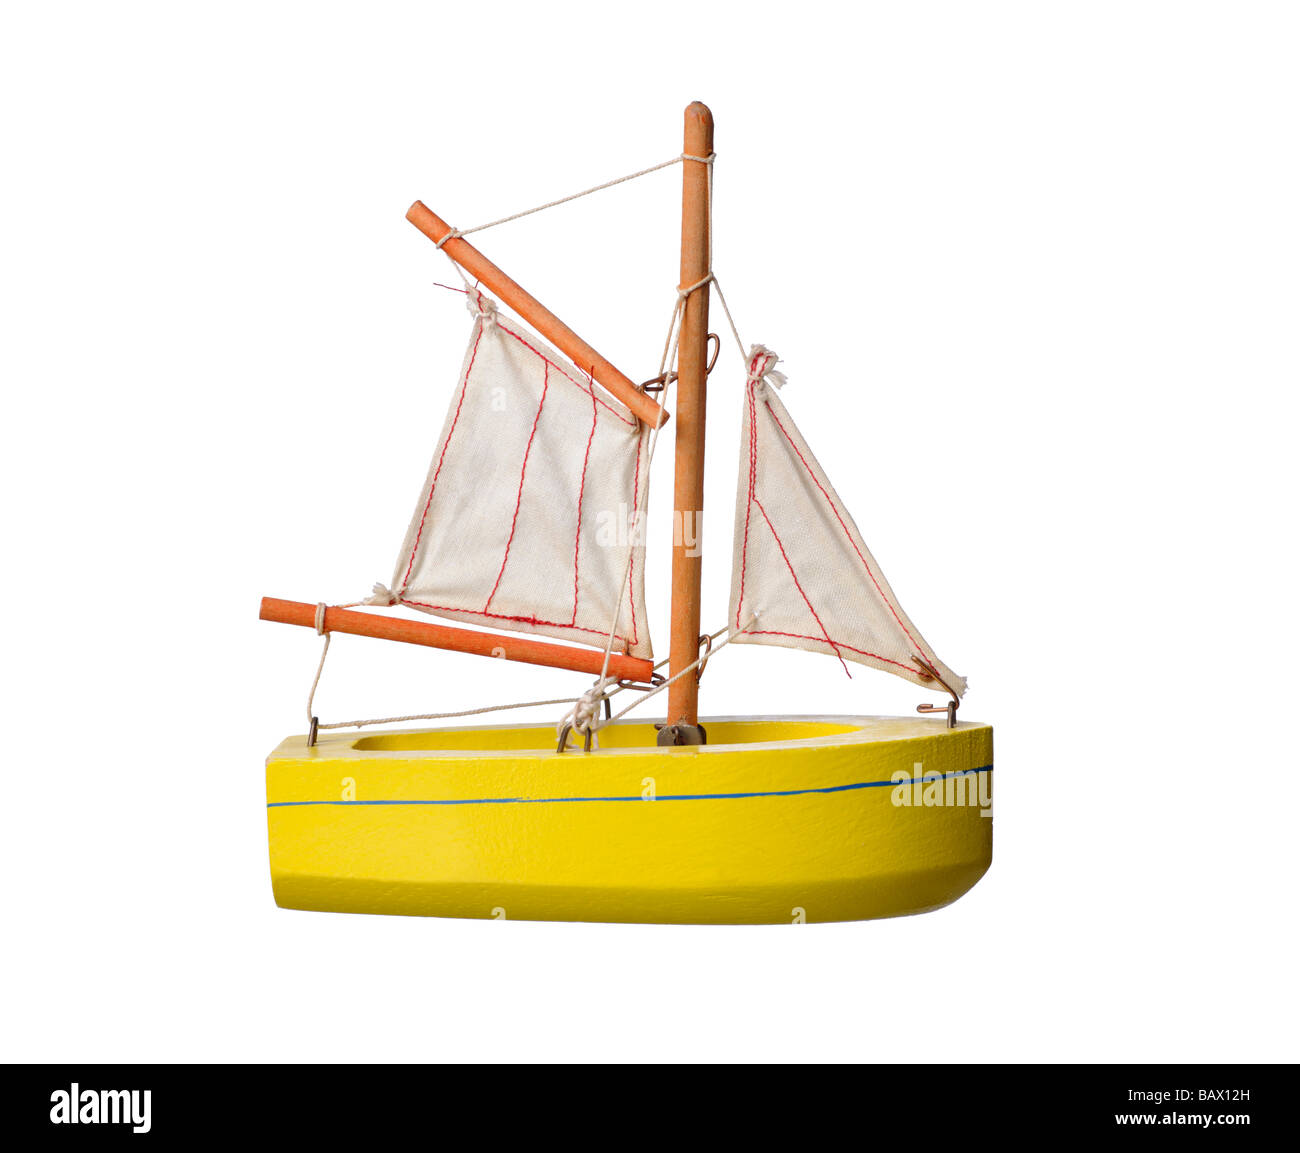 Wooden toy sail boat Stock Photo